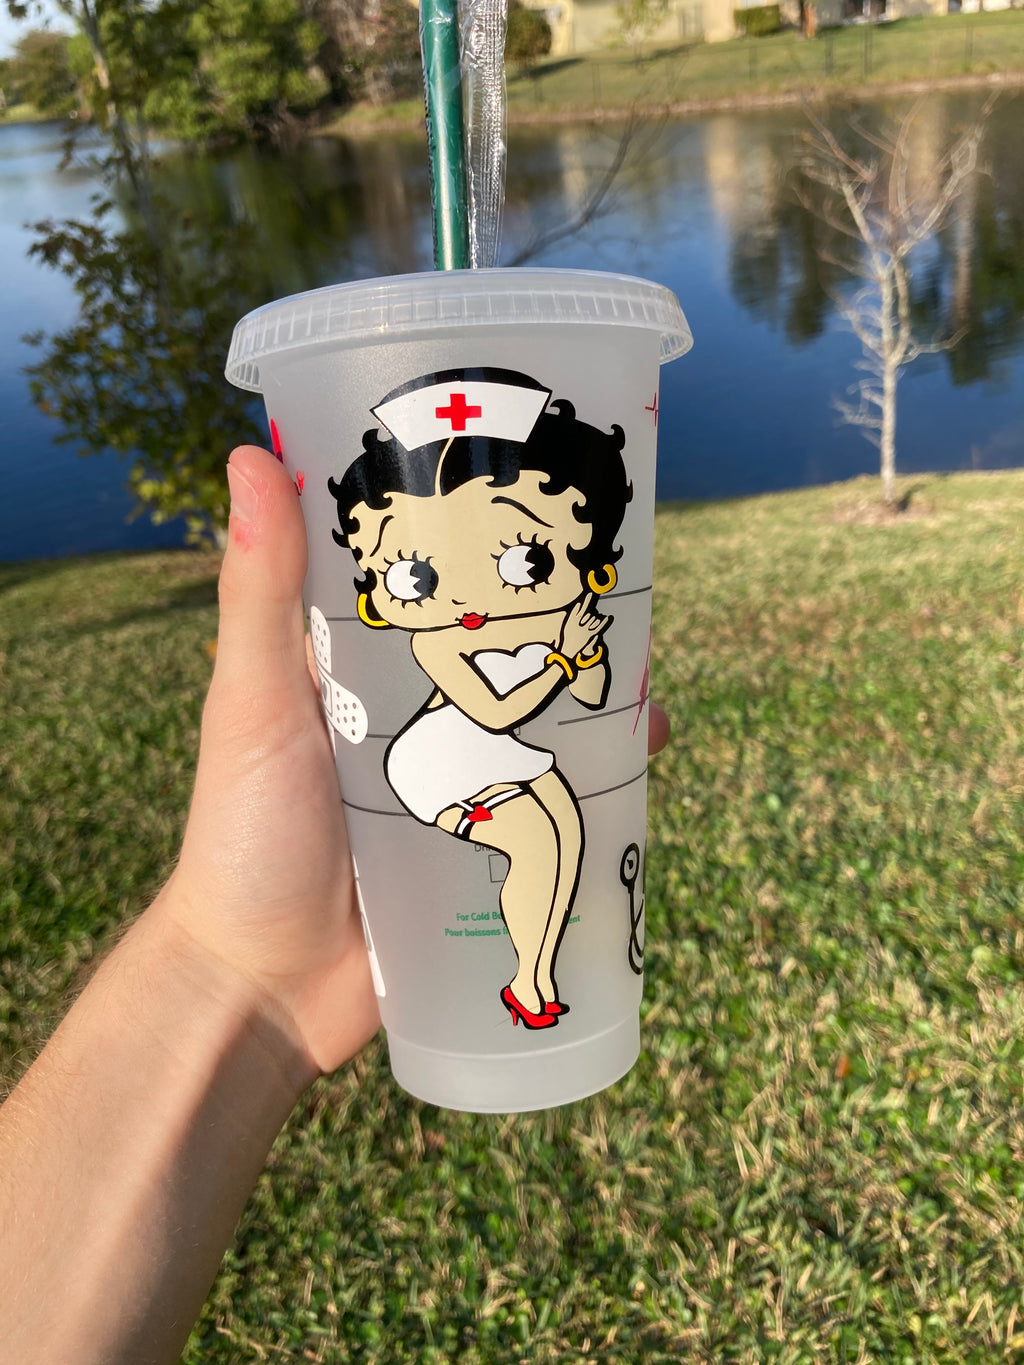 Nurse Betty Boop on the Job - HPK Personalized Products and more